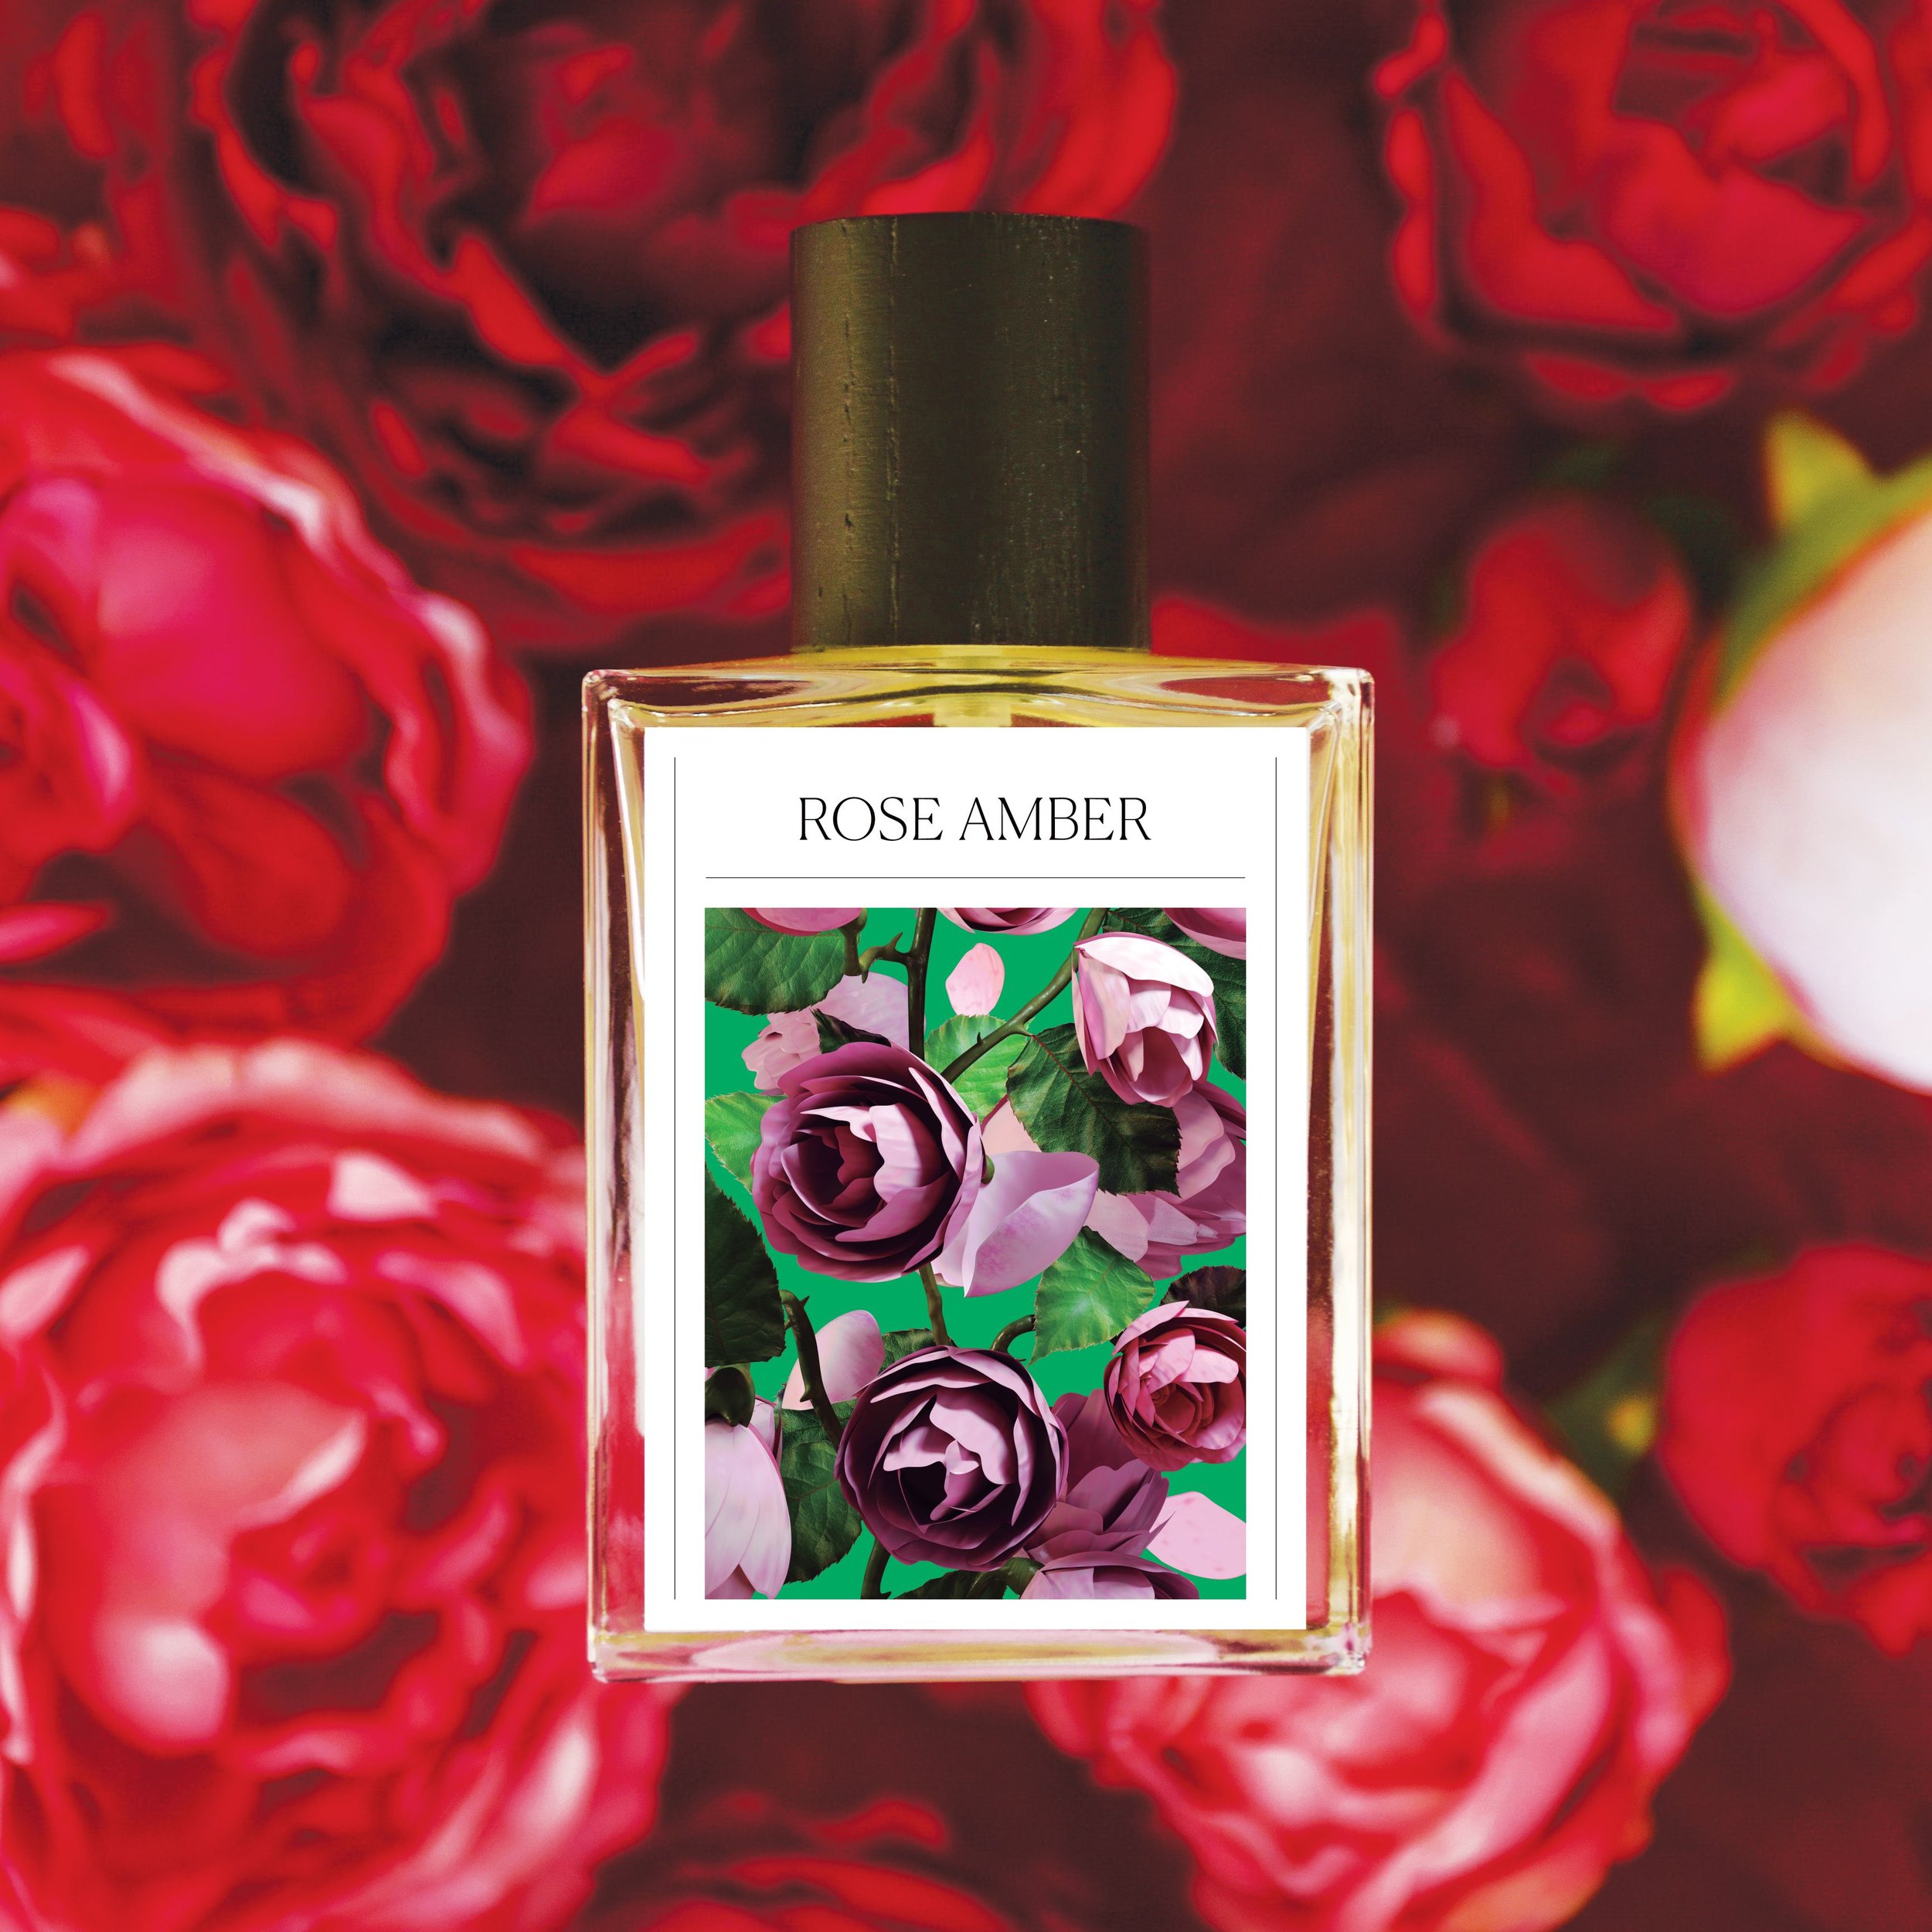 The 7 Virtues Want To Rebuild The World Through Perfume | Dieline ...